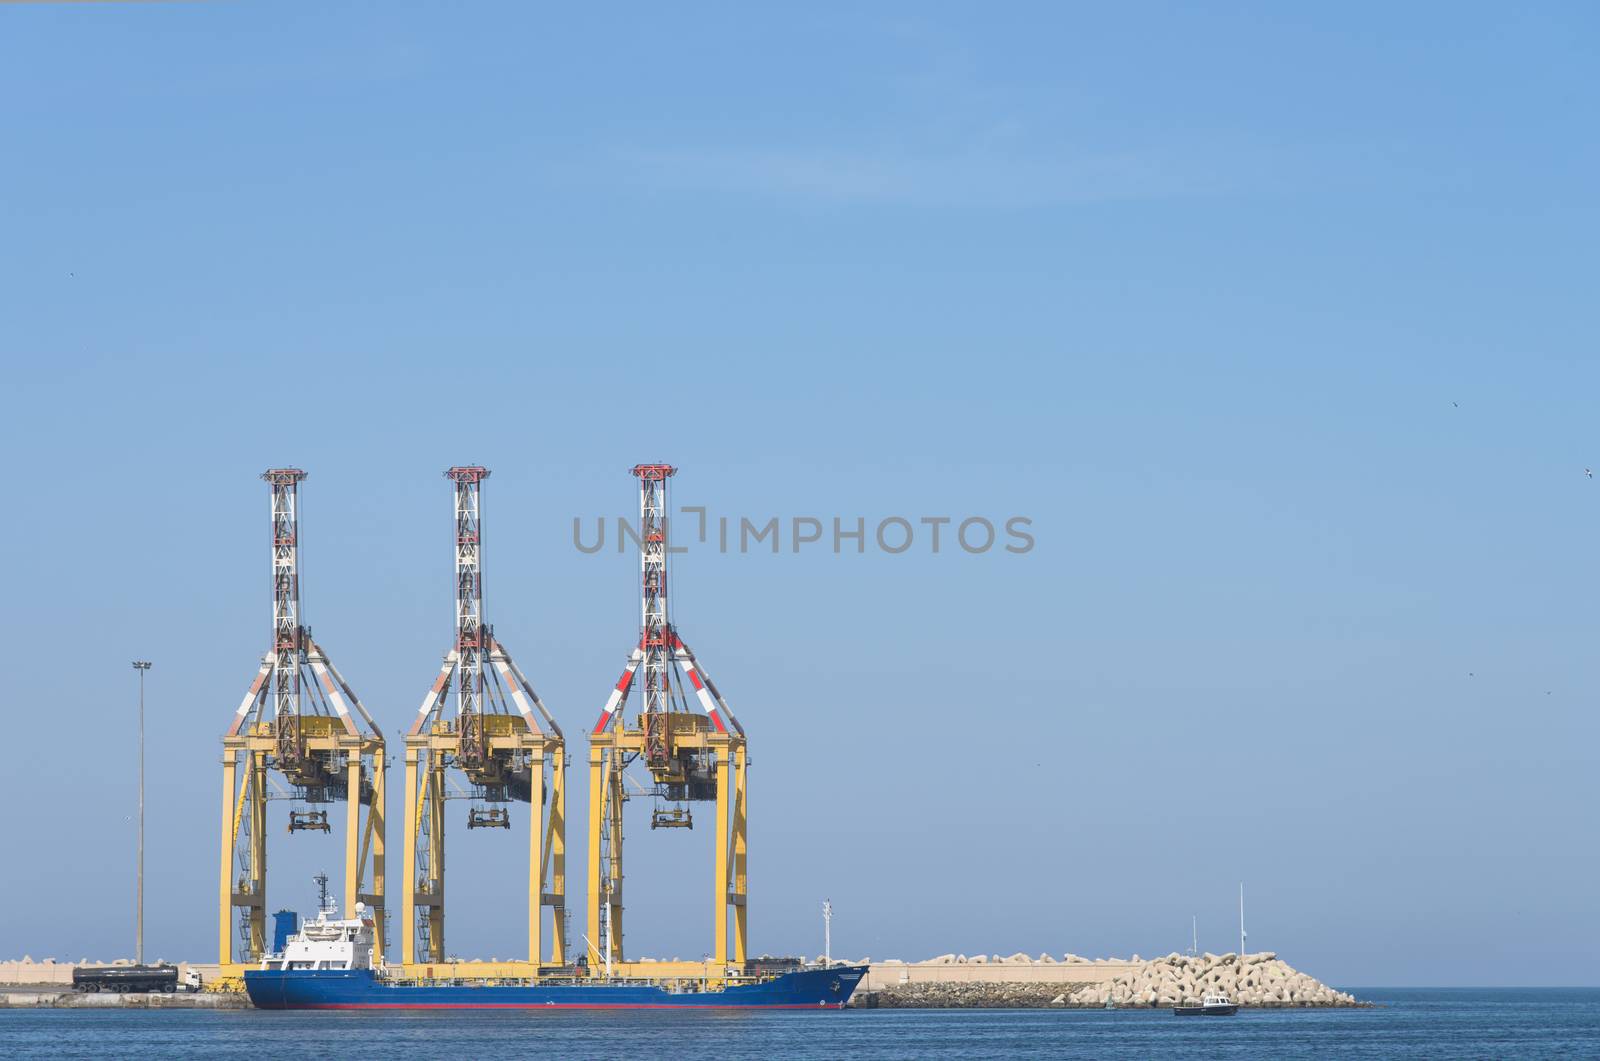 Small oil tanker moored at a breakwater with three container cranes.